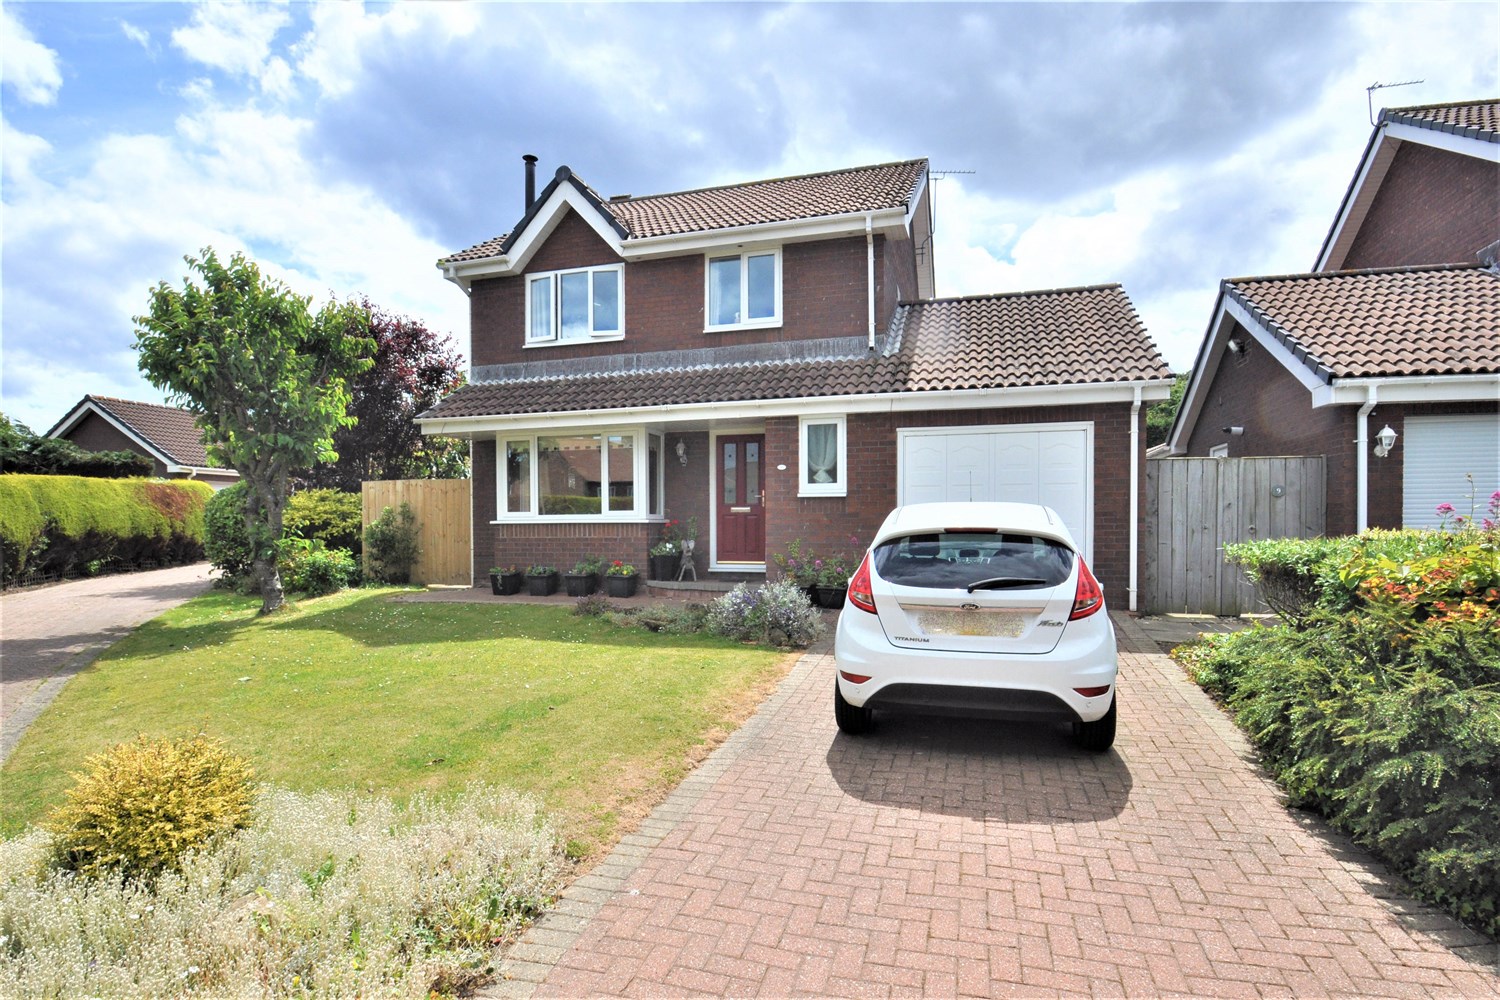 3 bed detached house for sale in Lakeside, South Shields  - Property Image 1